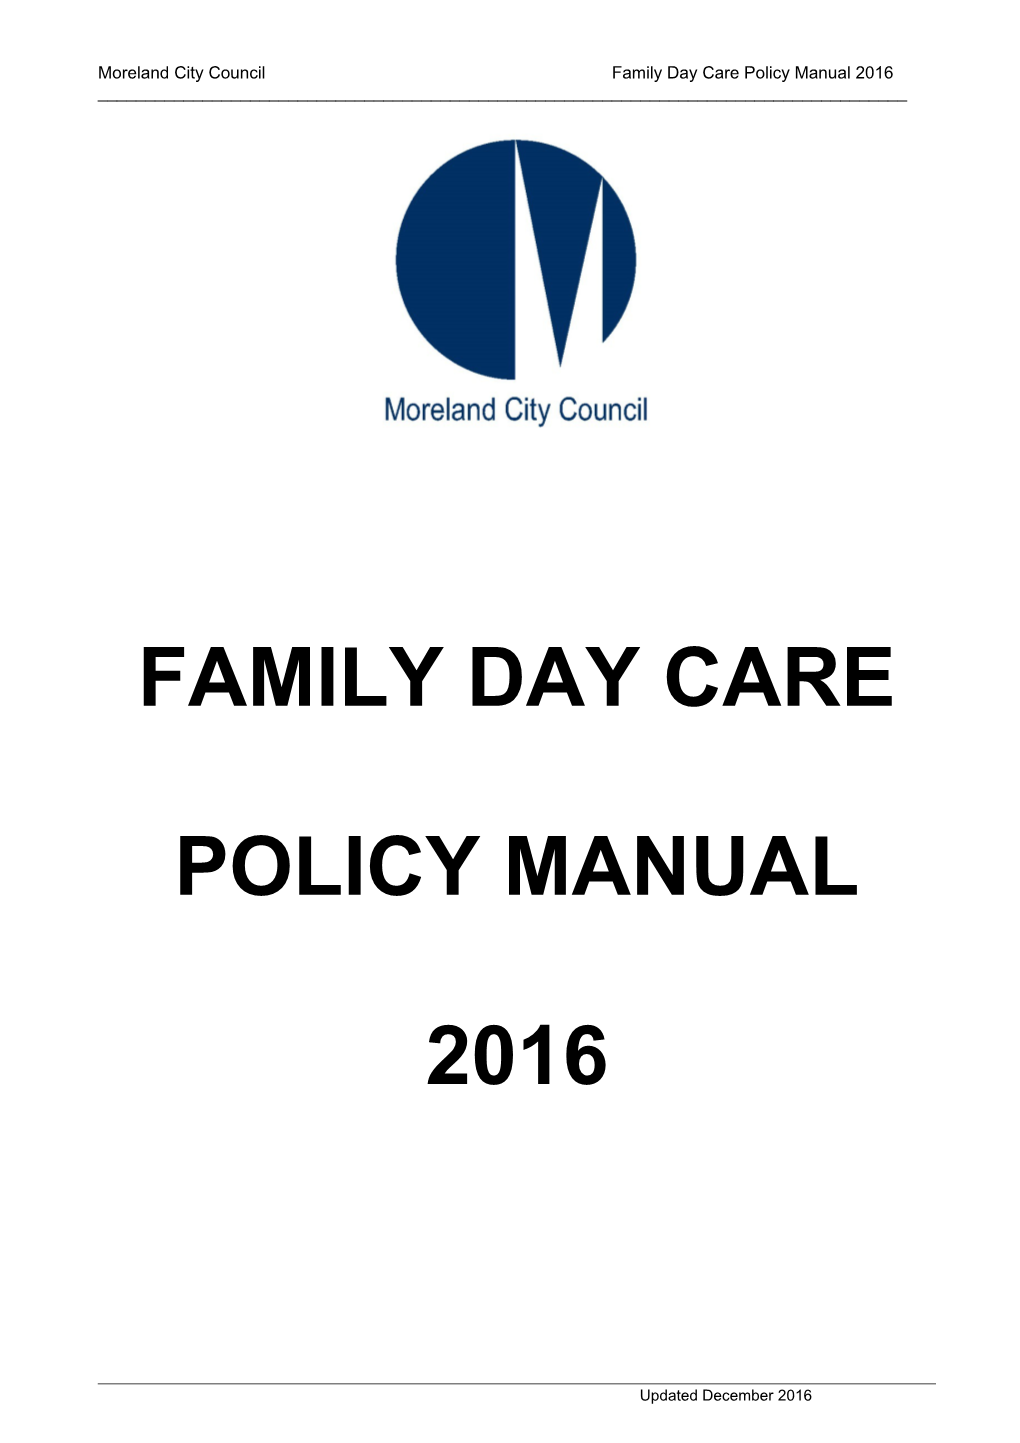 Moreland City Council Family Day Care Policy Manual 2016